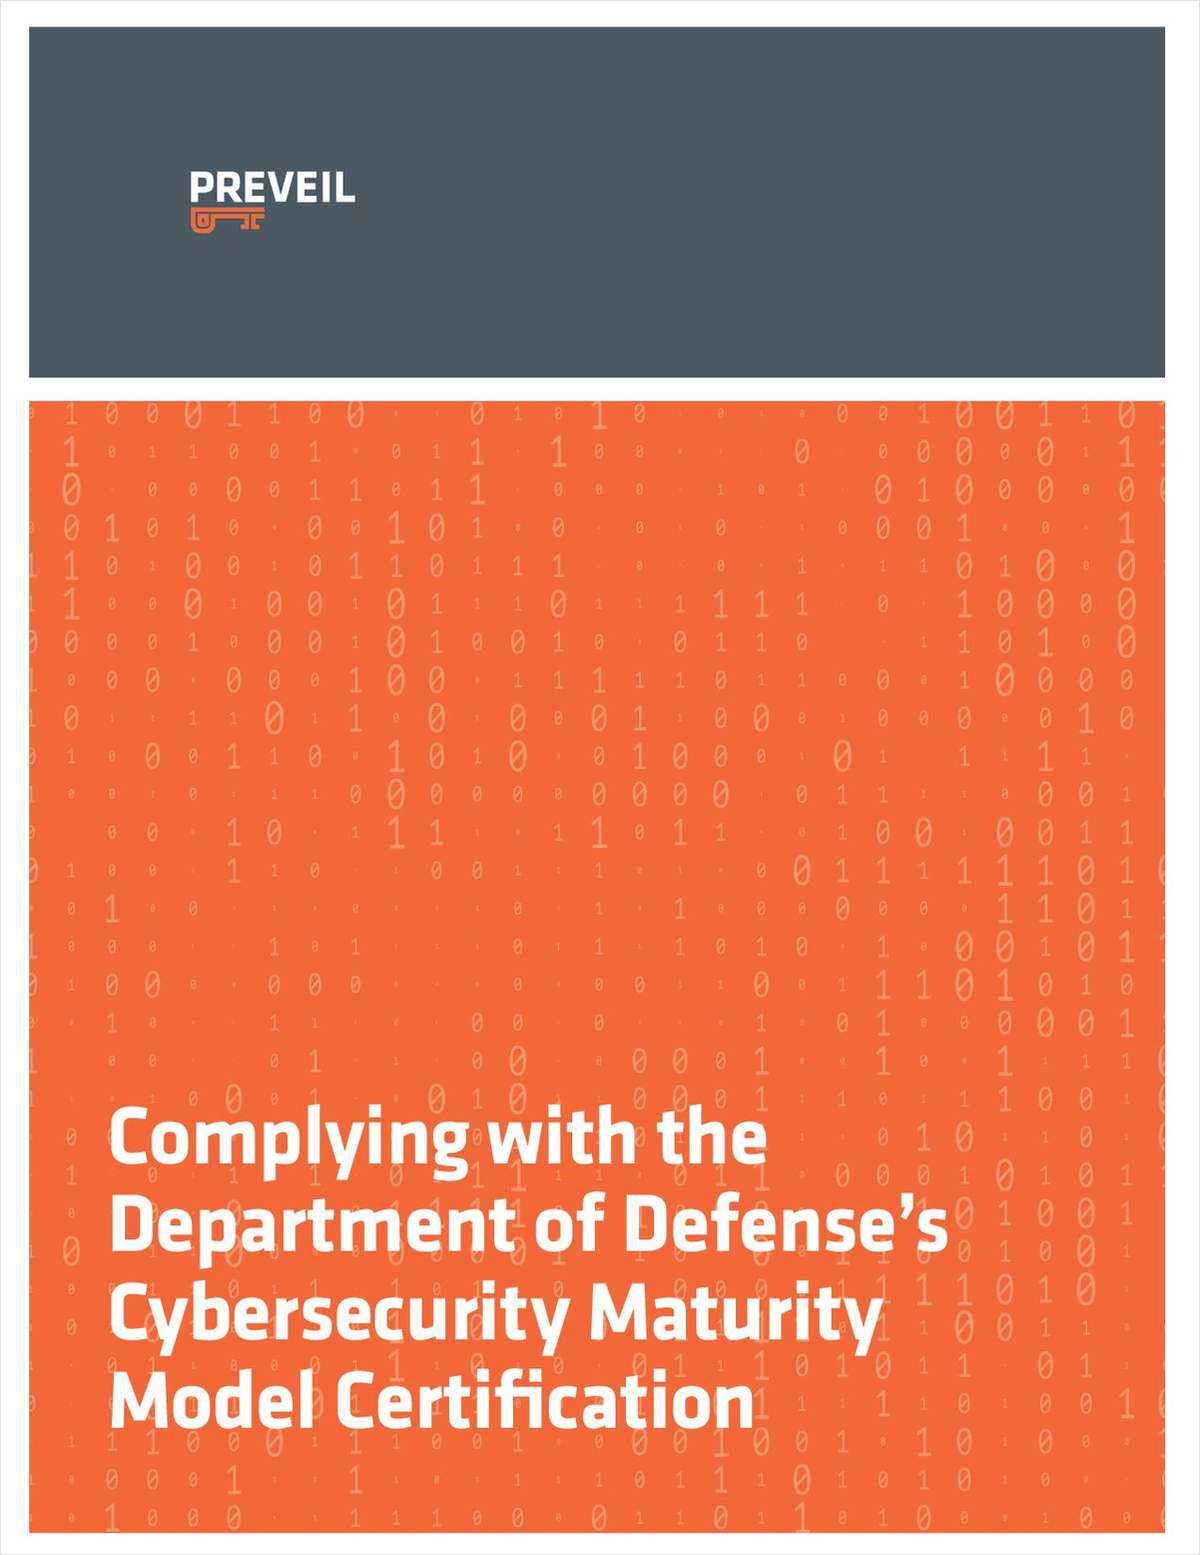 Complying with the Department of Defense's Cybersecurity Maturity Model Certification